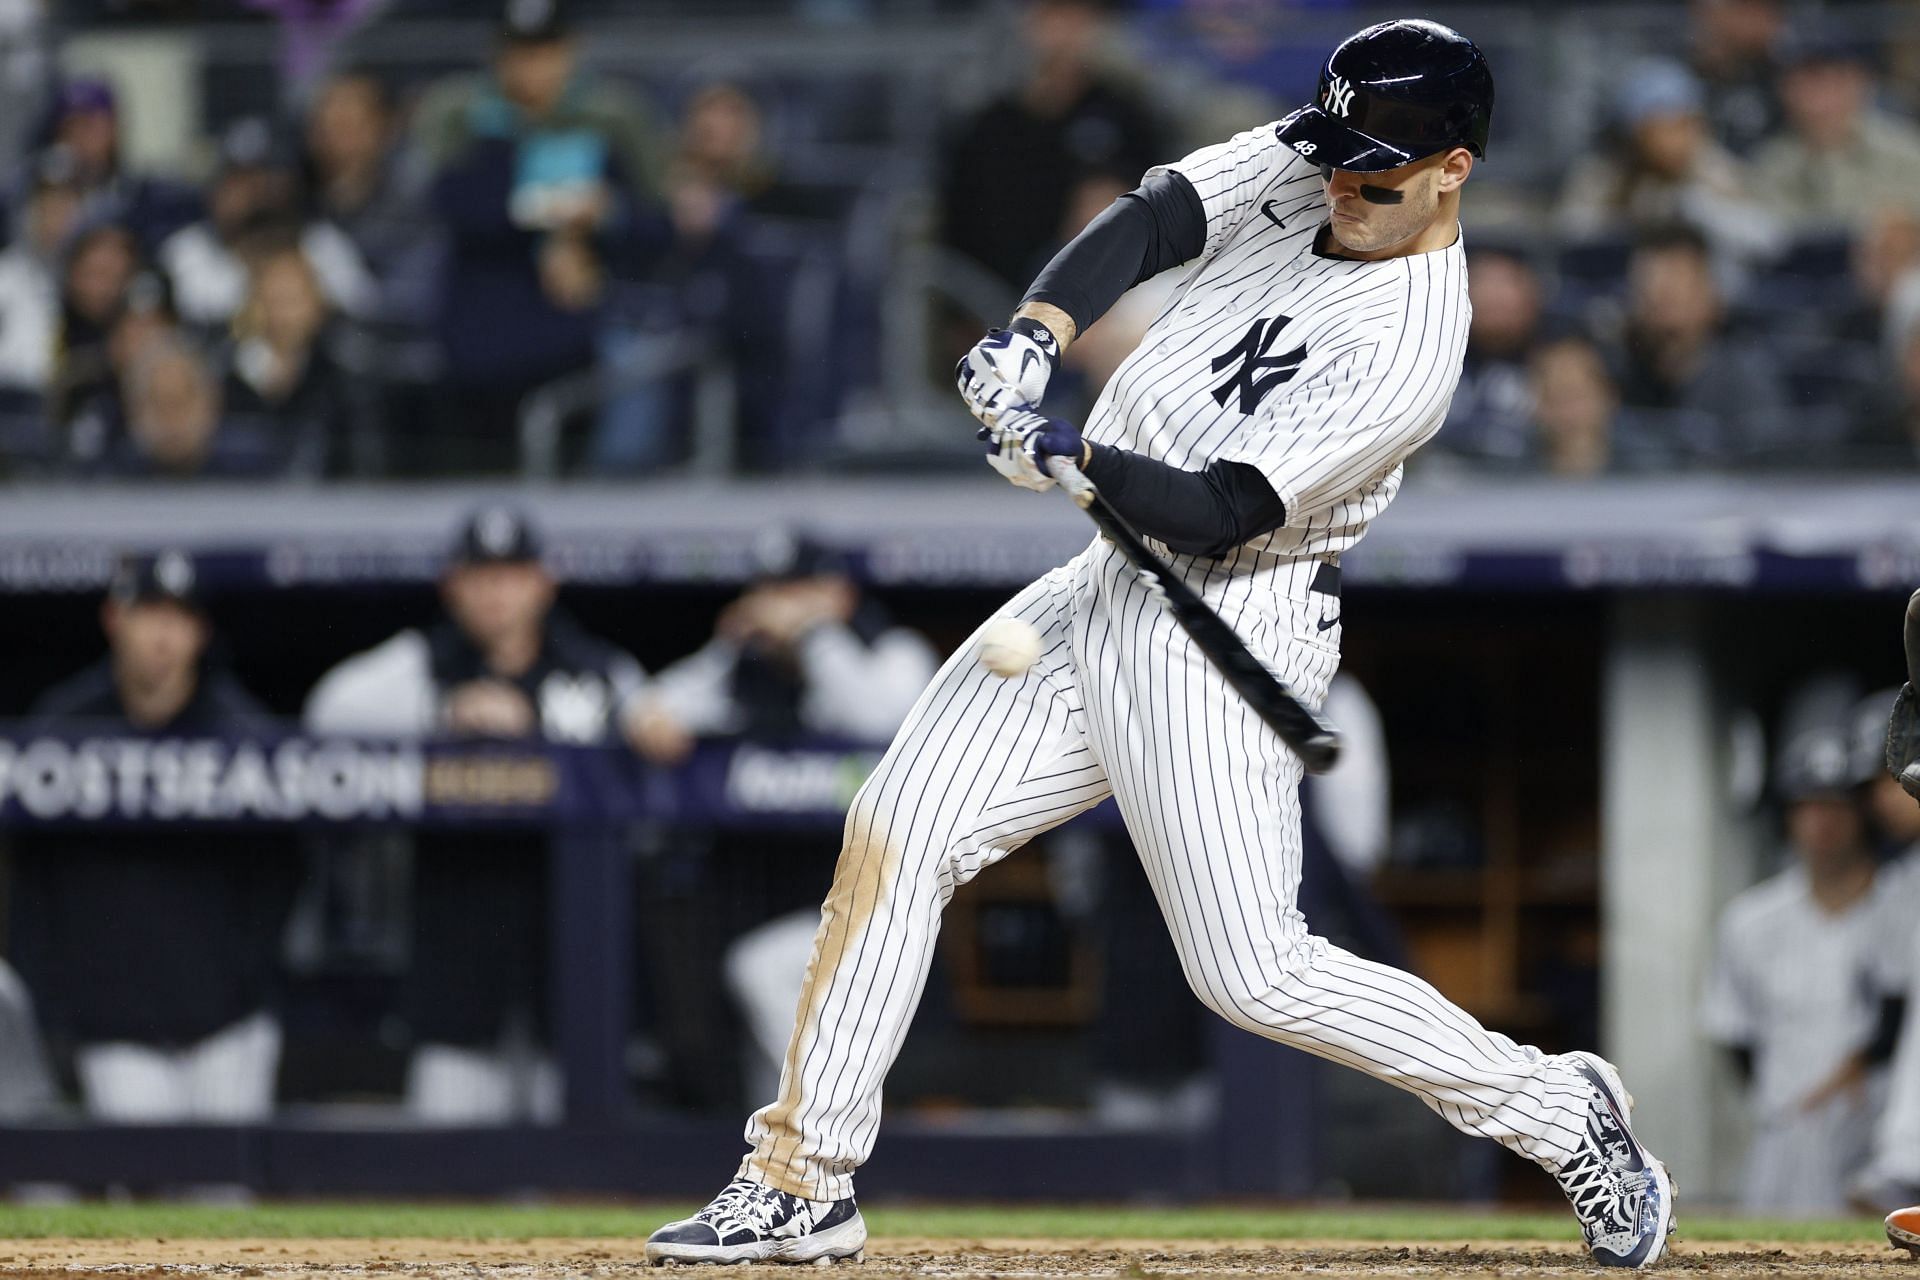 Anthony Rizzo comes through as New York Yankees sweep Miami Marlins